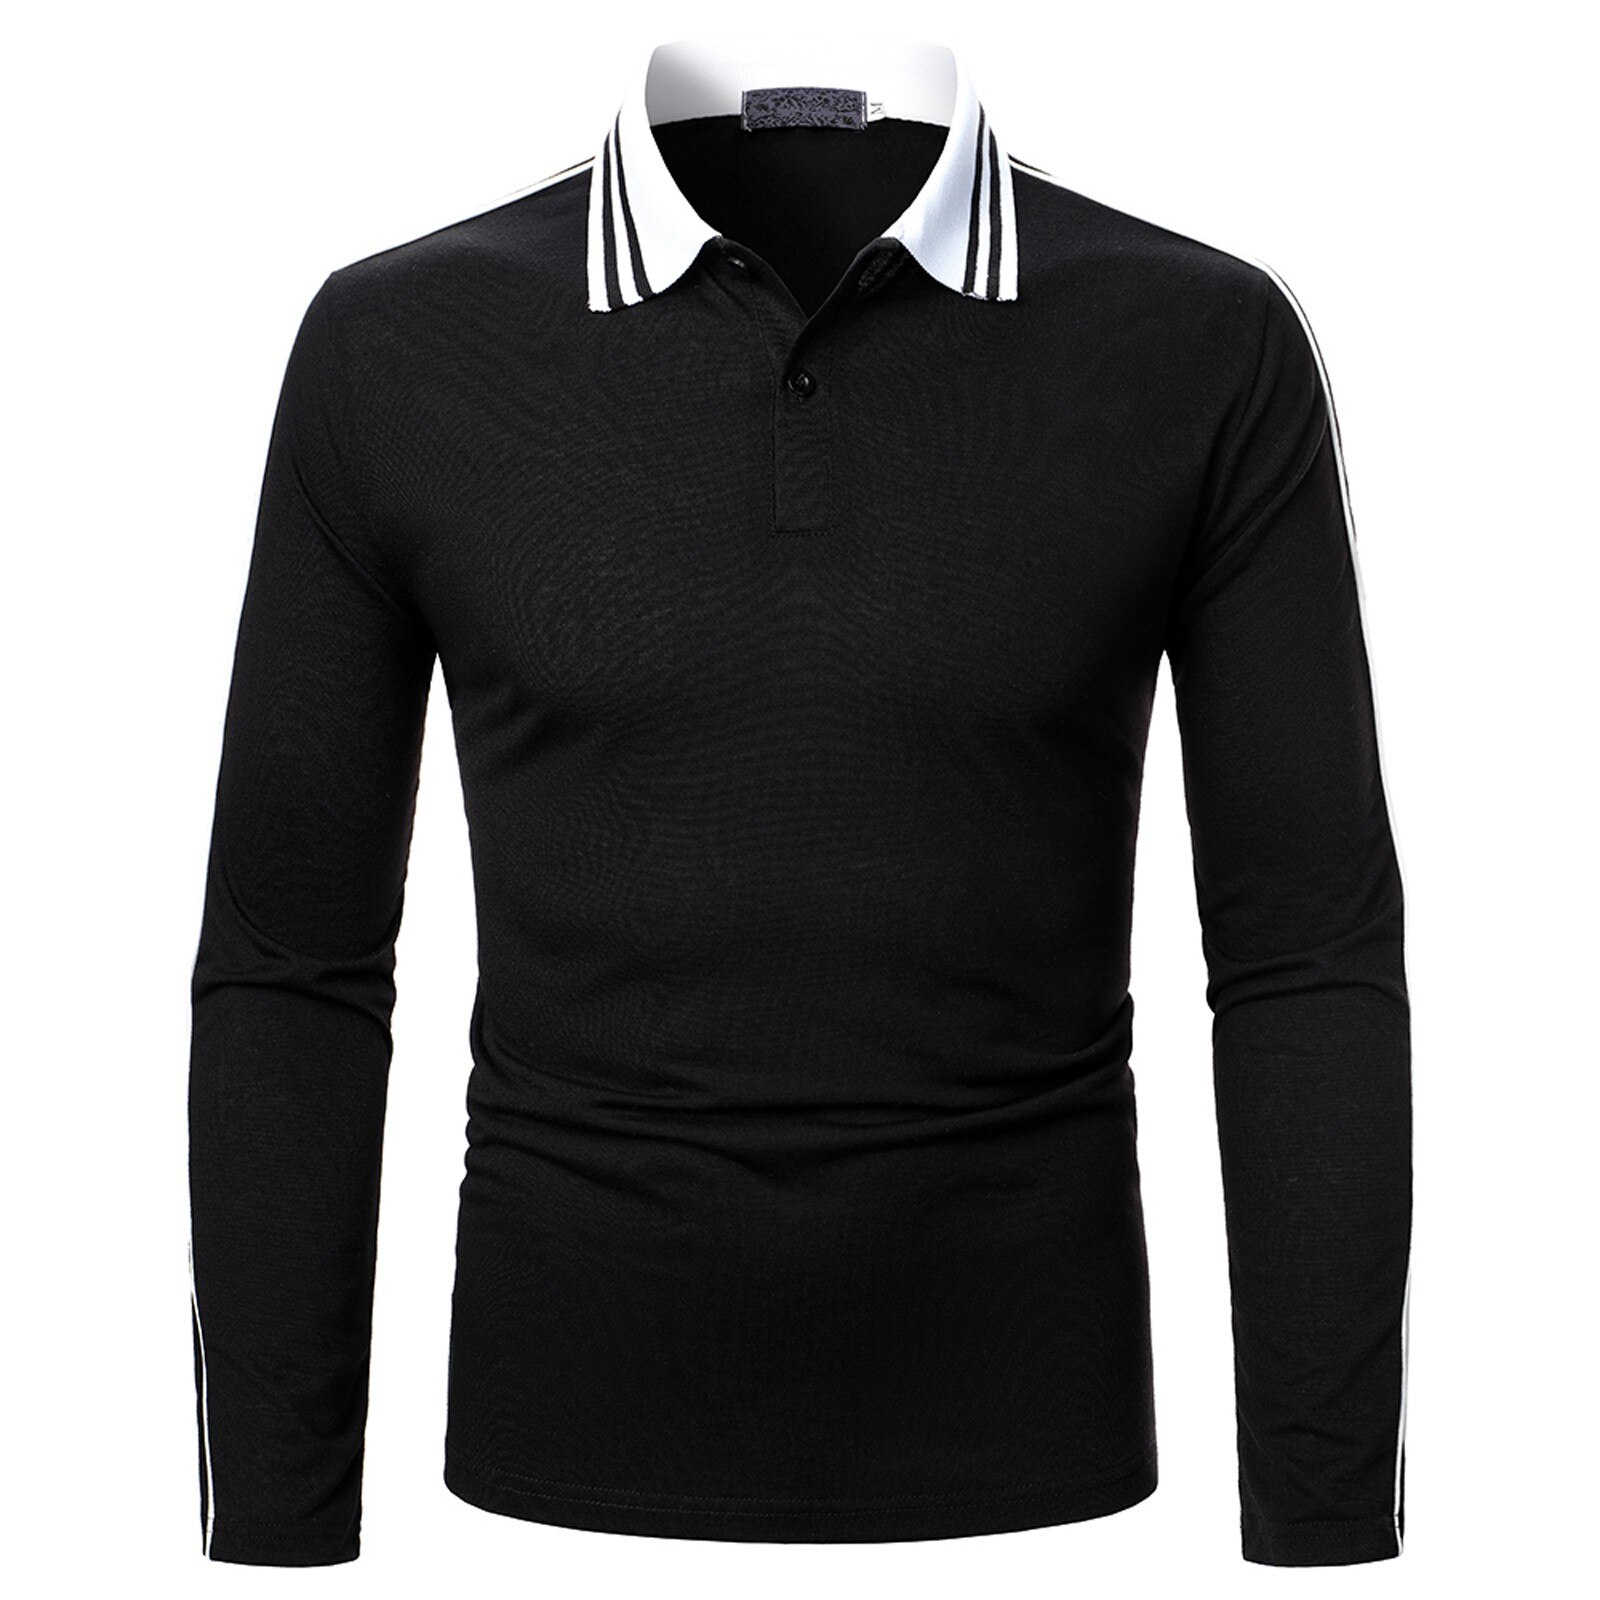 Business Casual Mannen Polo Shirt Dikkere Heren Lange Mouwen Effen Polo Shirts Herfst Camisa Polo 'S Tops Tees Plus Size